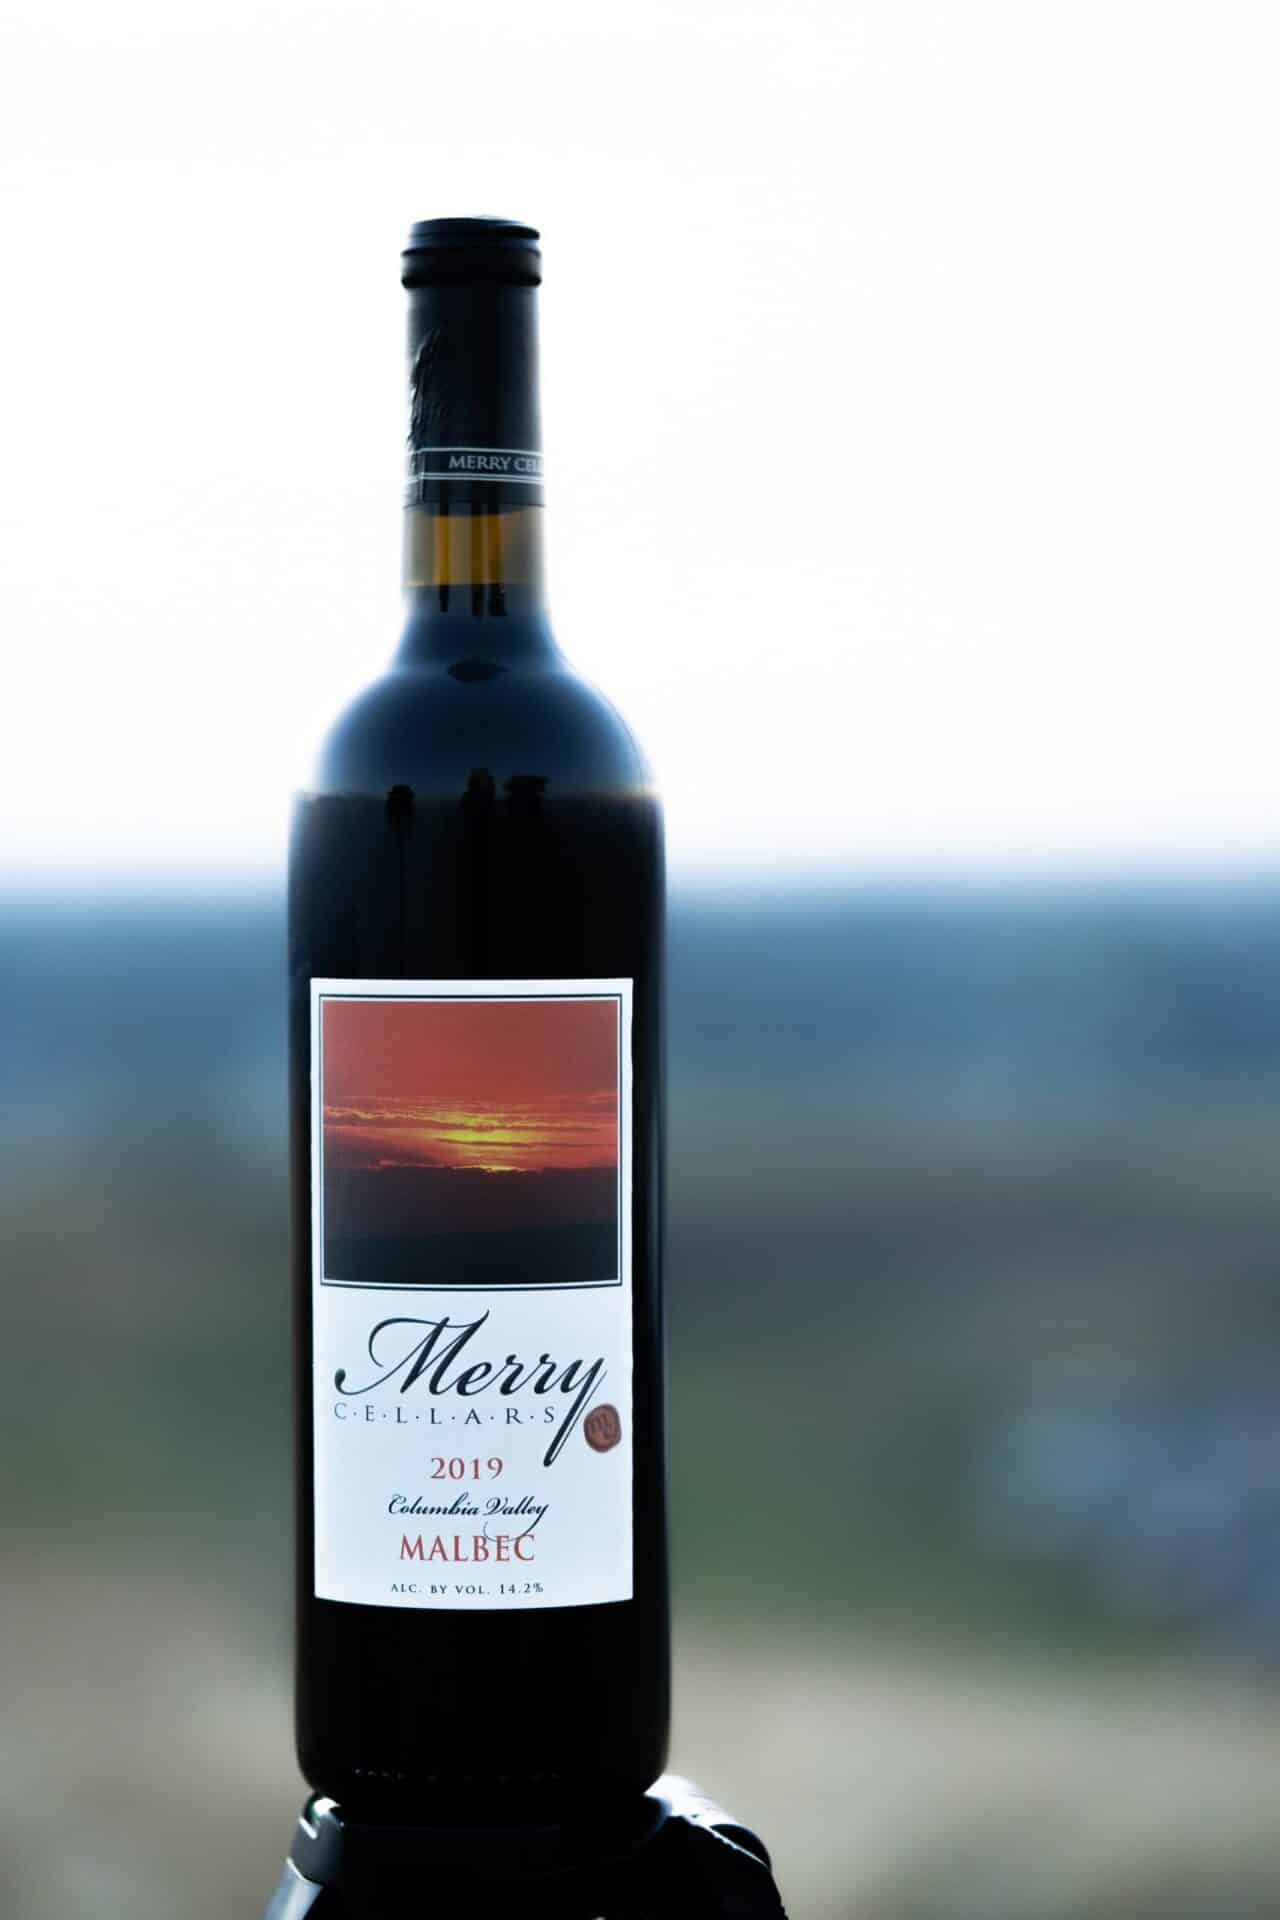 A bottle of Merry Cellars' 2019 Malbec Wine with a blurred outdoors backdrop. This is a red wine.